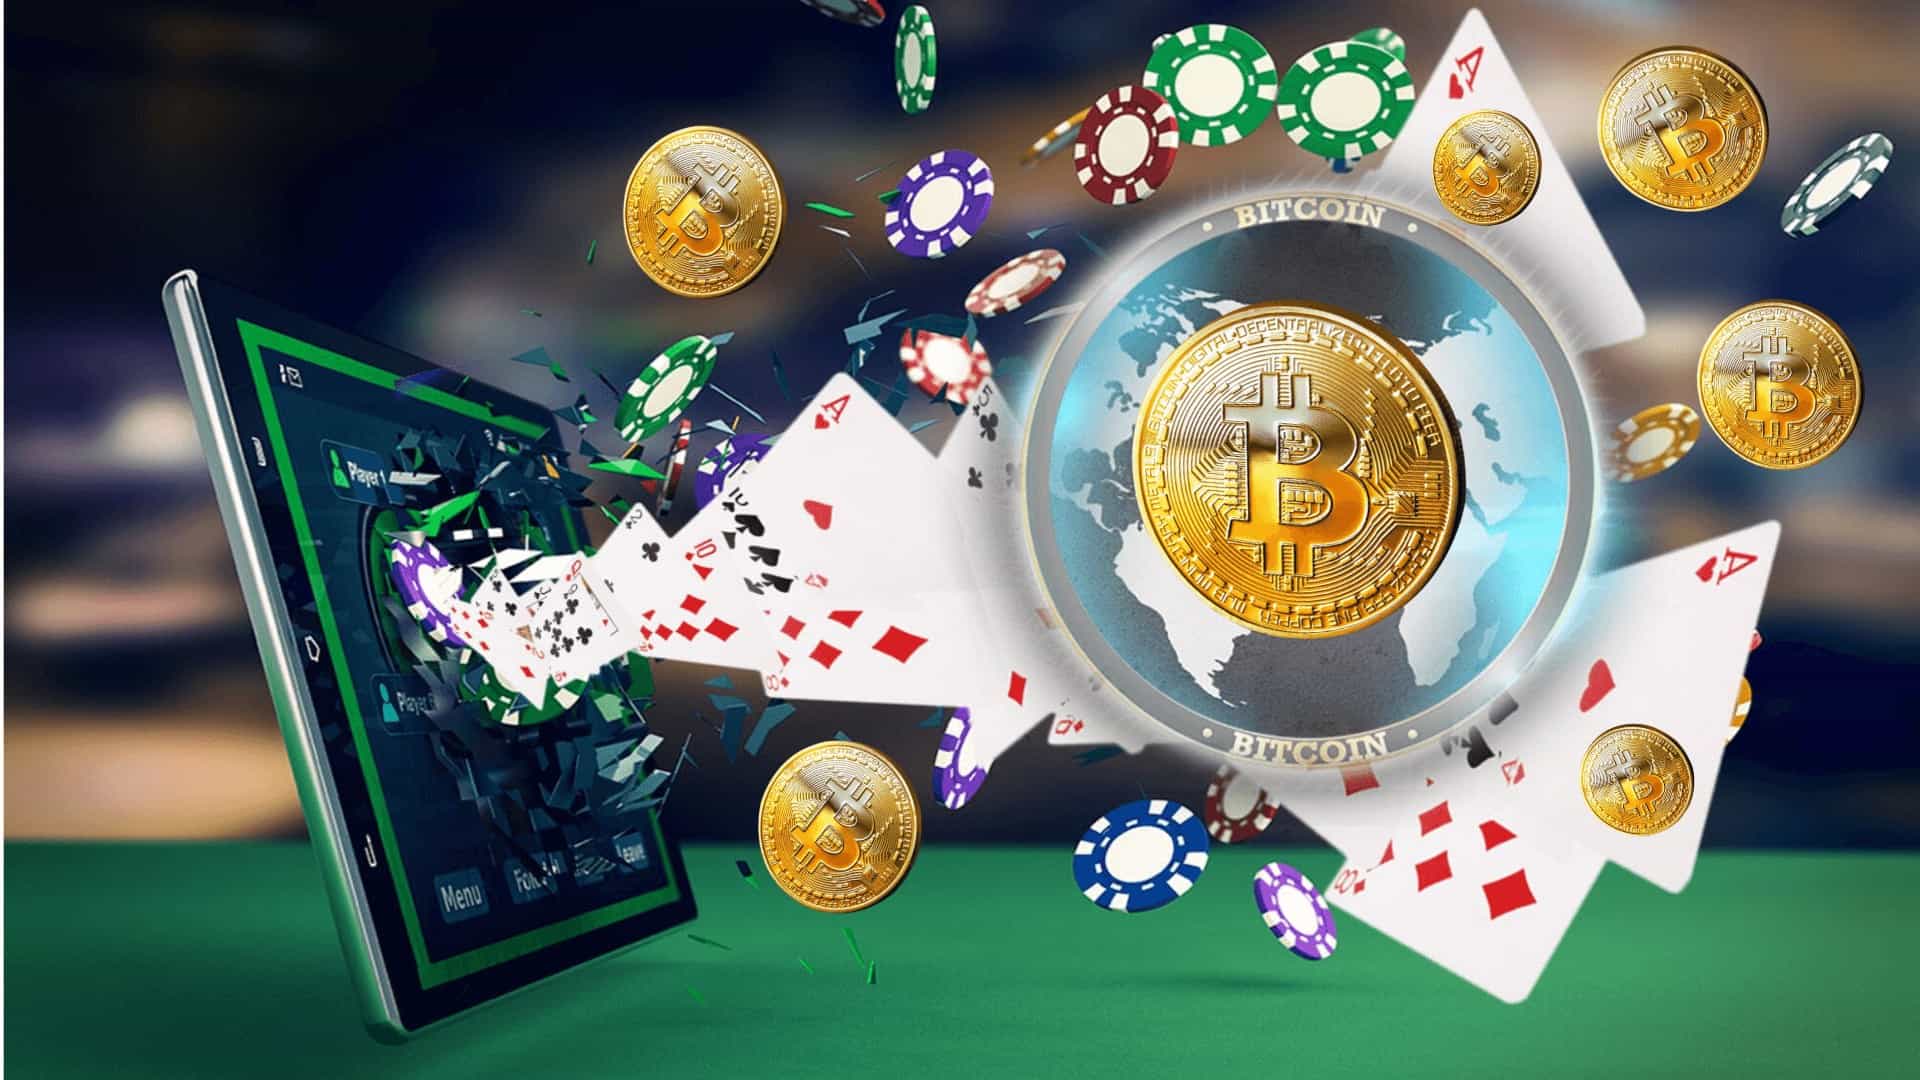 At Last, The Secret To gamble with bitcoin Is Revealed